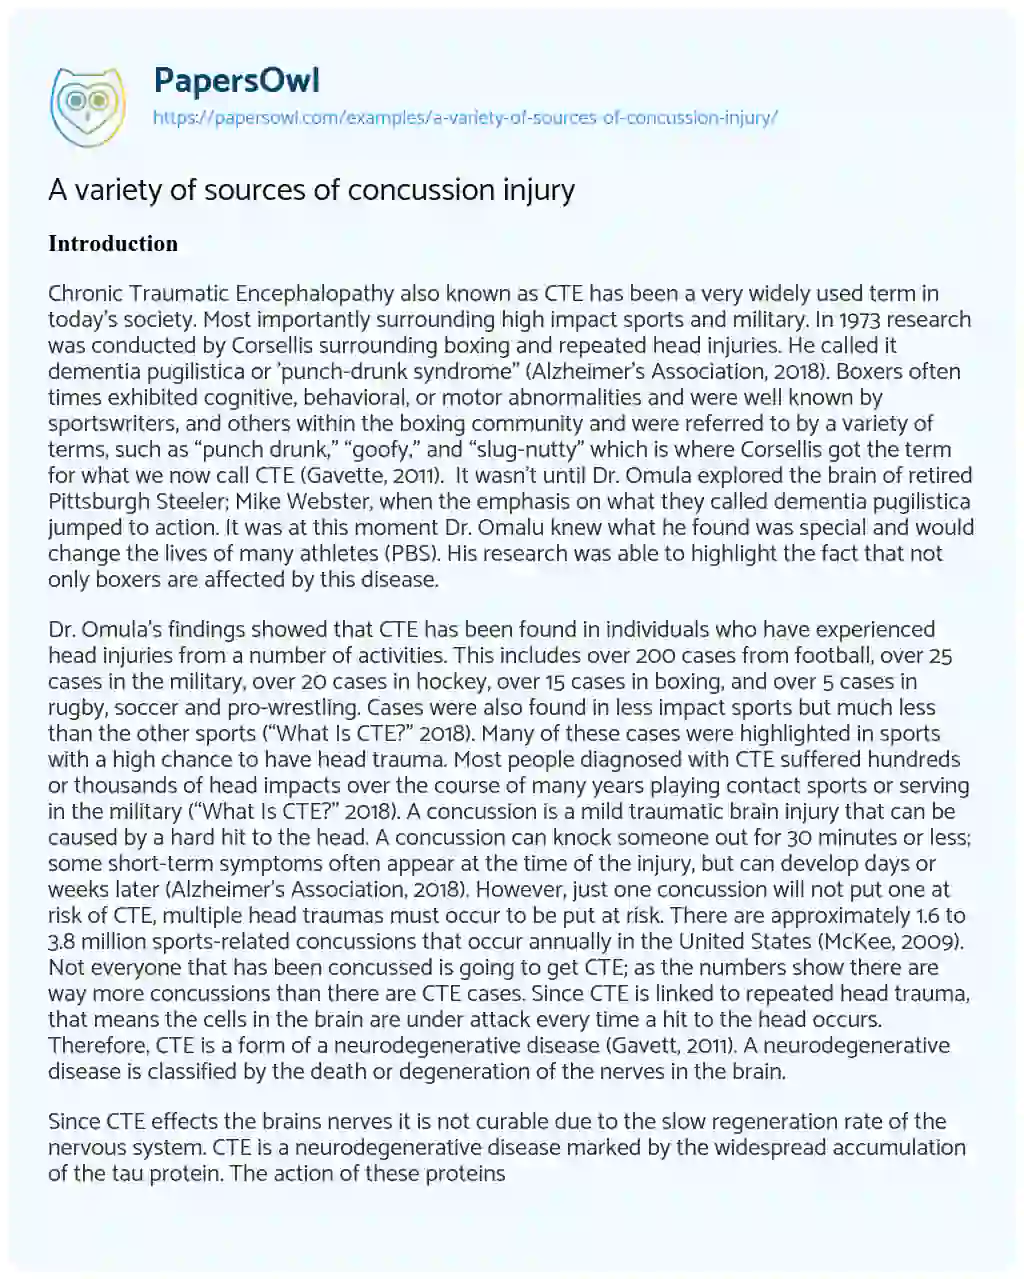 Essay on A Variety of Sources of Concussion Injury